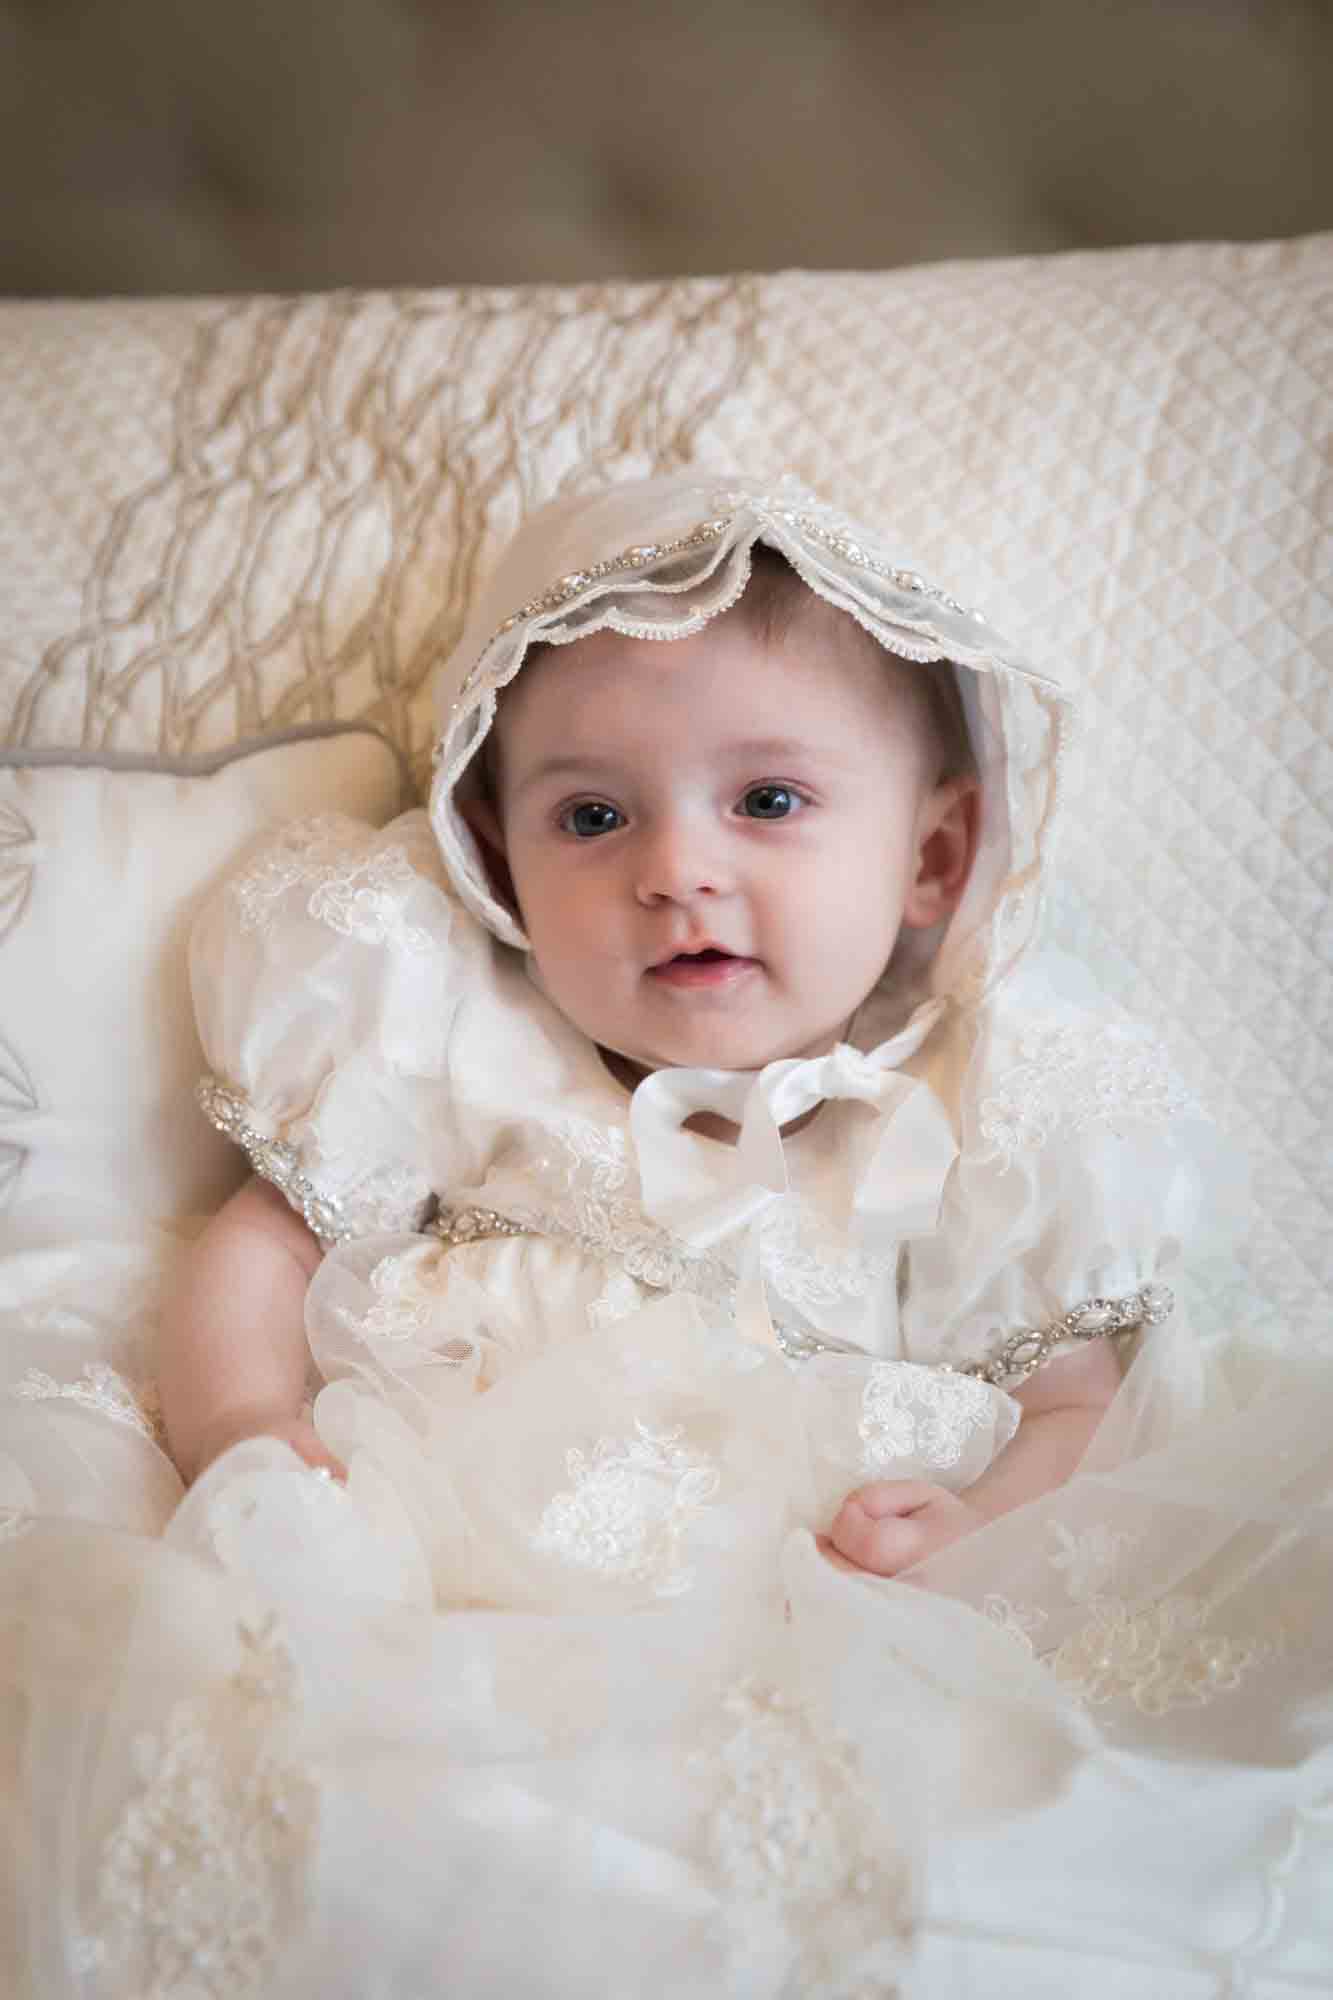 Baby girl wearing white baptism dress and white bonnet sitting in front of pillows